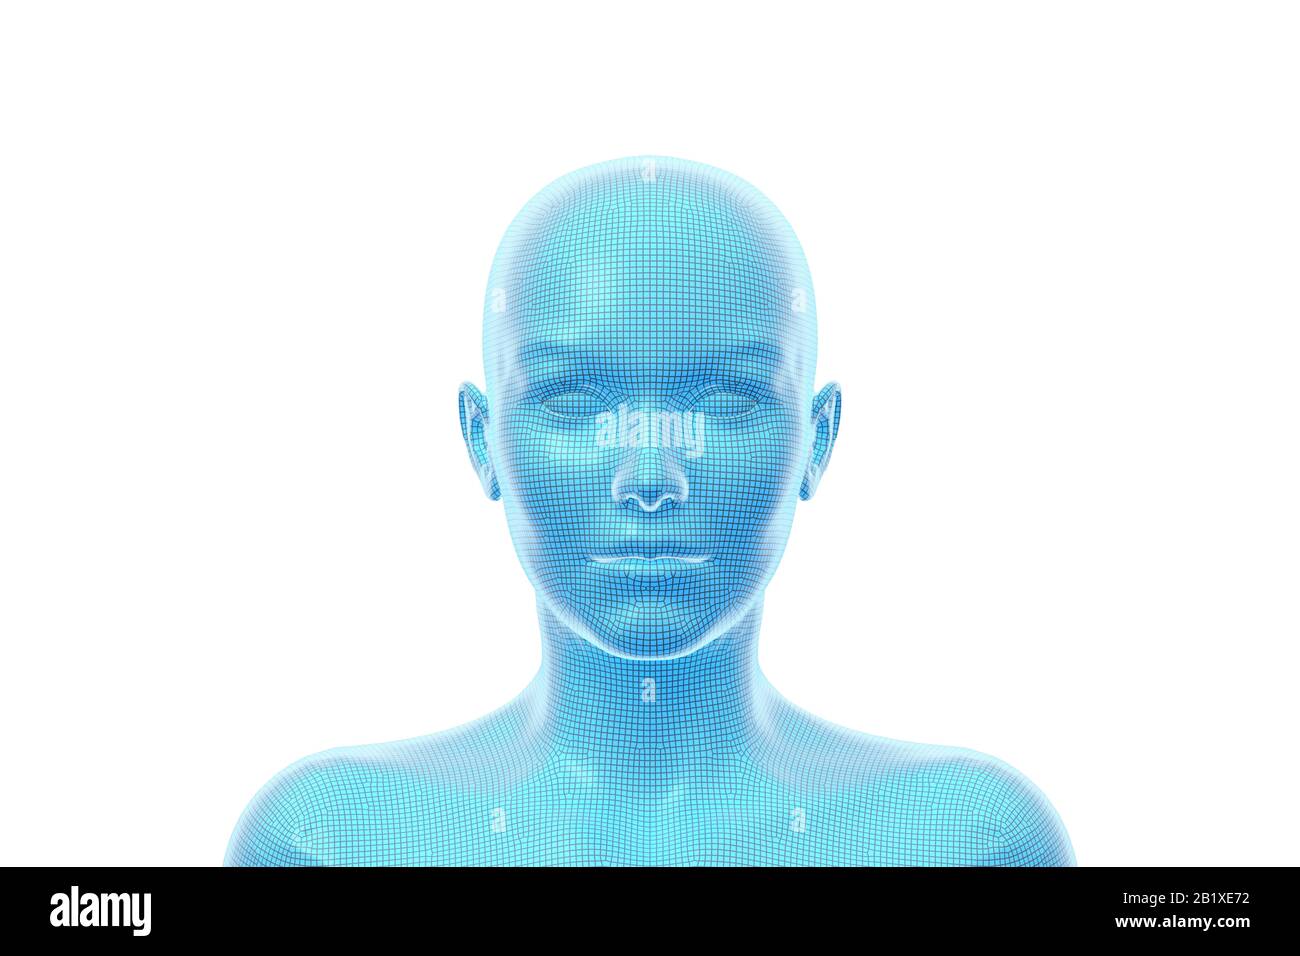 Woman, Head of Female Human, 3D Wireframe Stock Photo